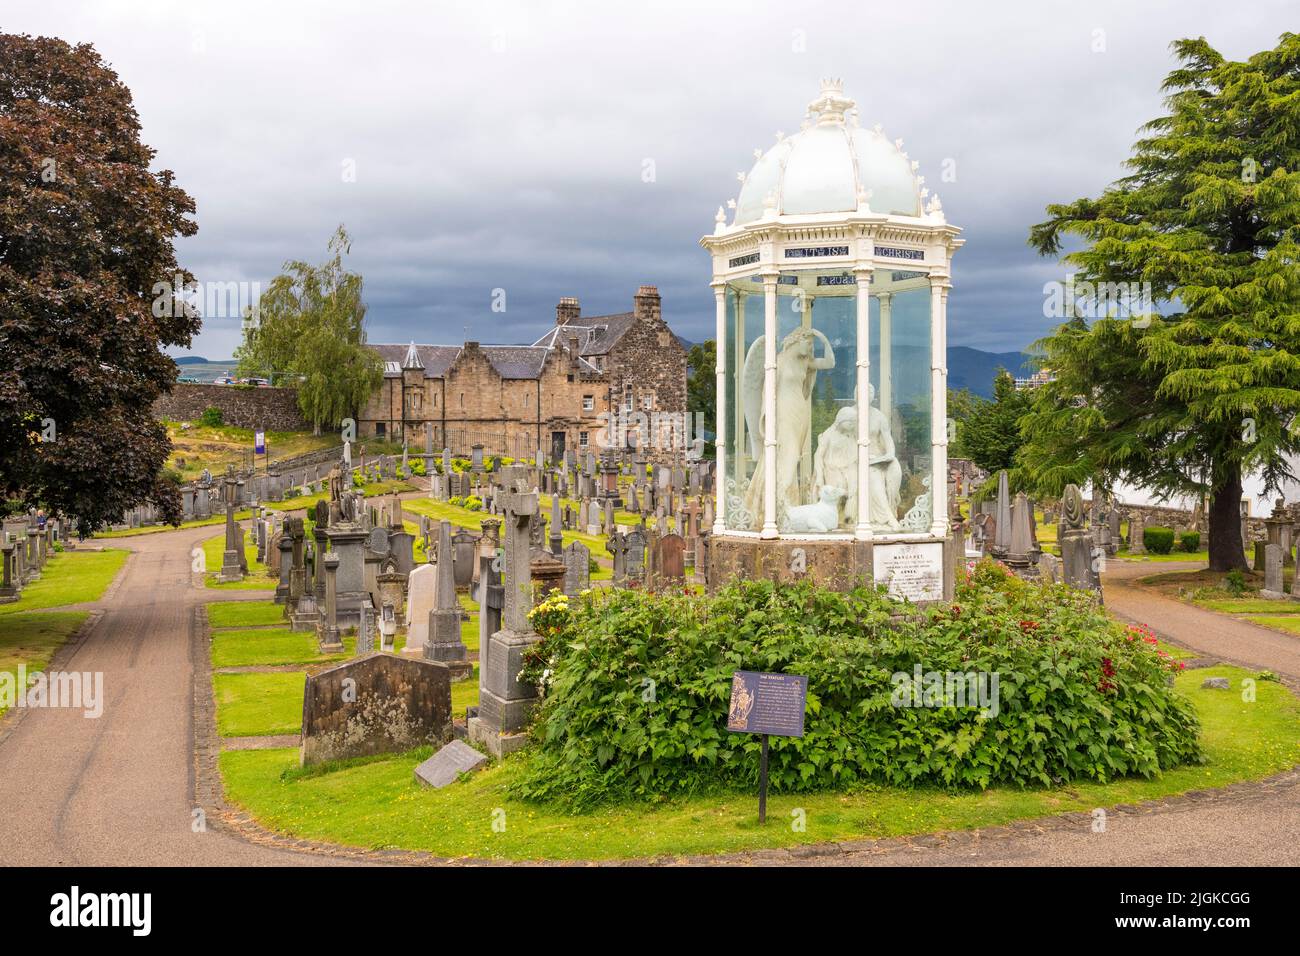 The Martyrs' Monument in The Old Town Cemetery, Stirling. Marble group by Handyside Ritchie, erected in 1859. Stock Photo